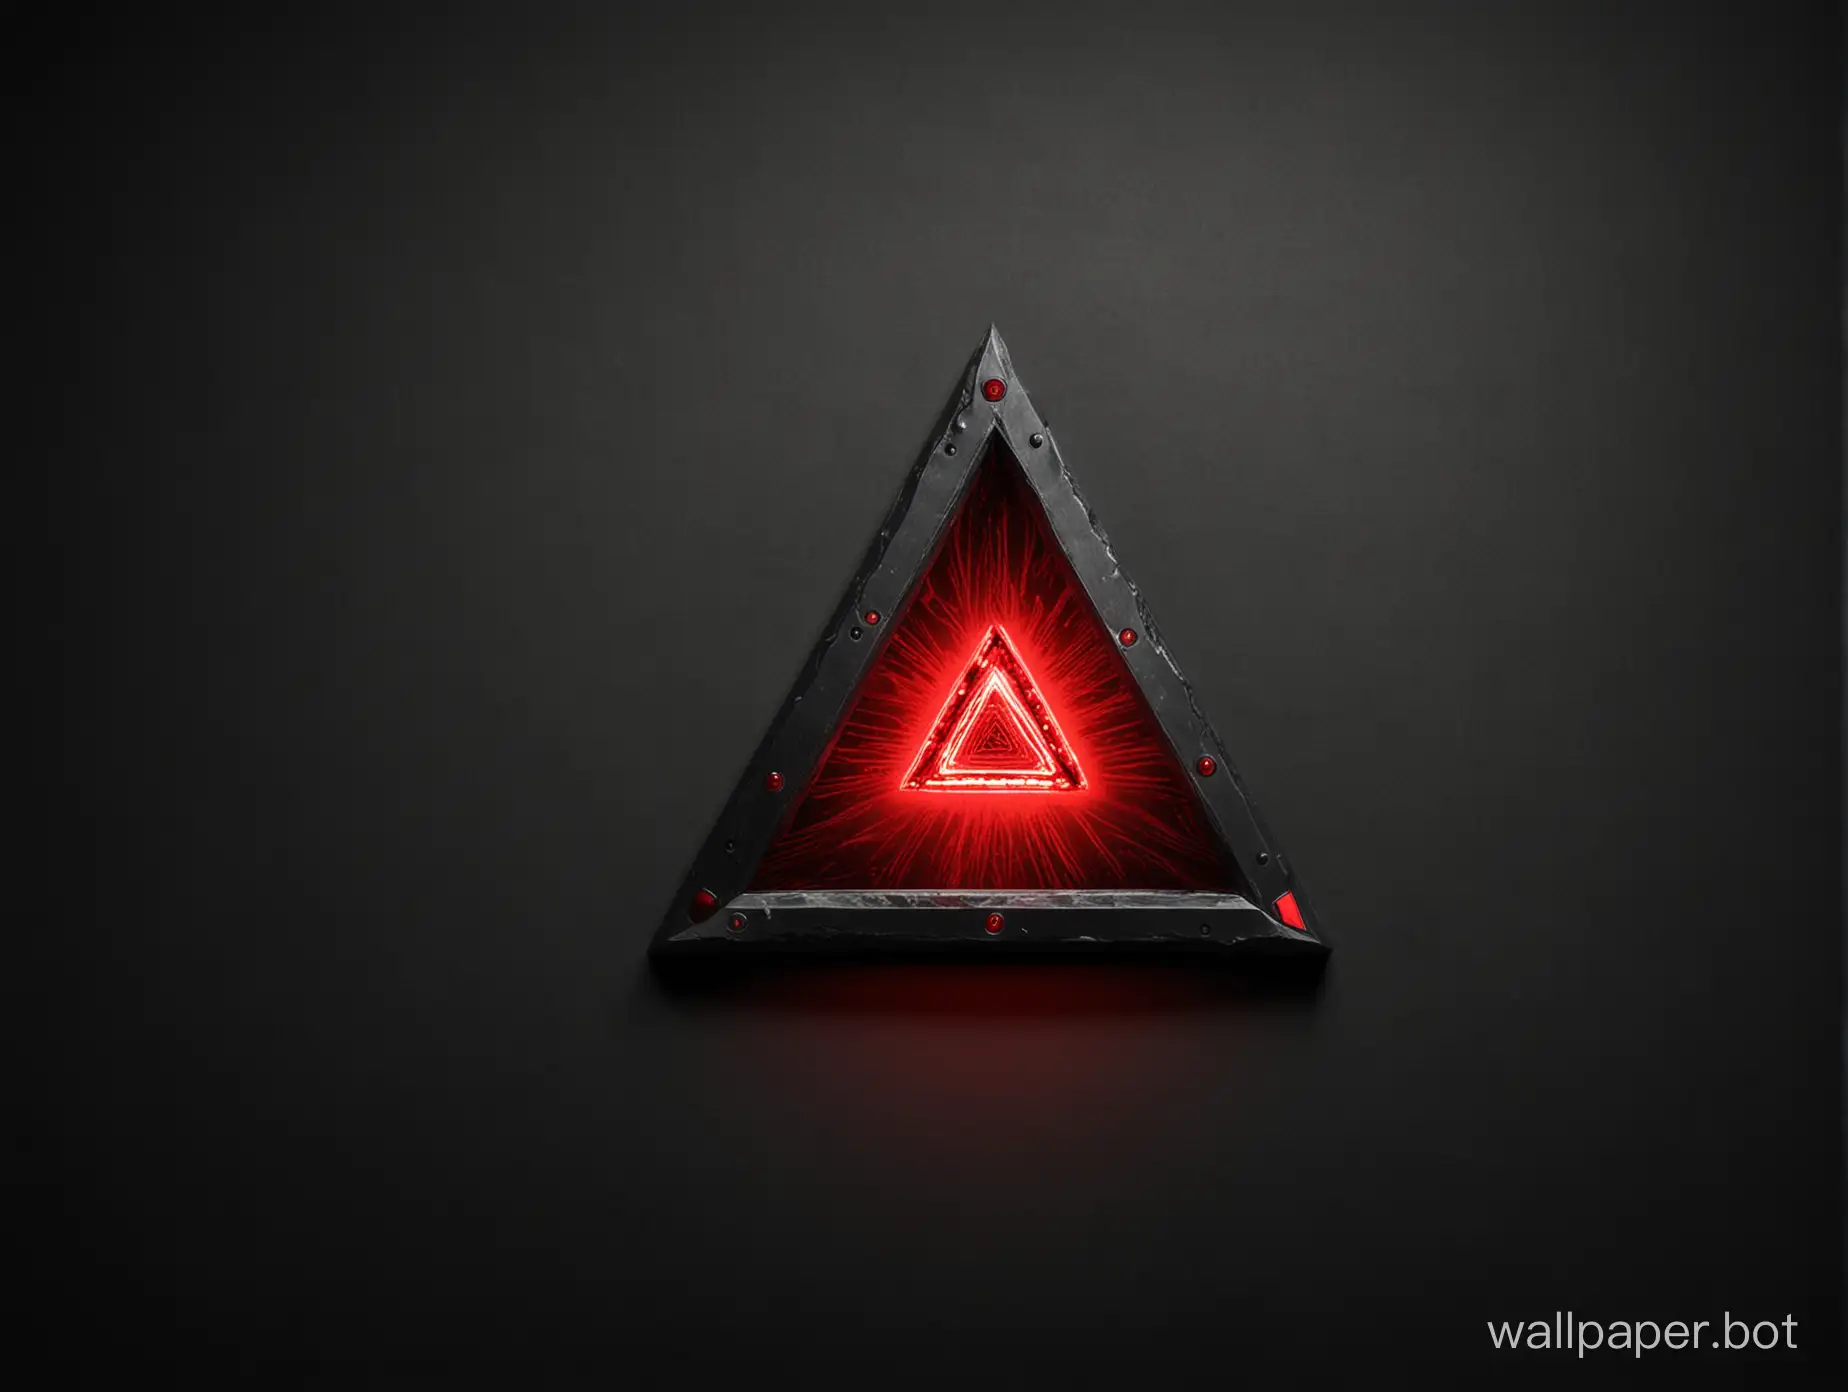 3840p wallpaper, black metal triangle with red LED in it, dark shadow background